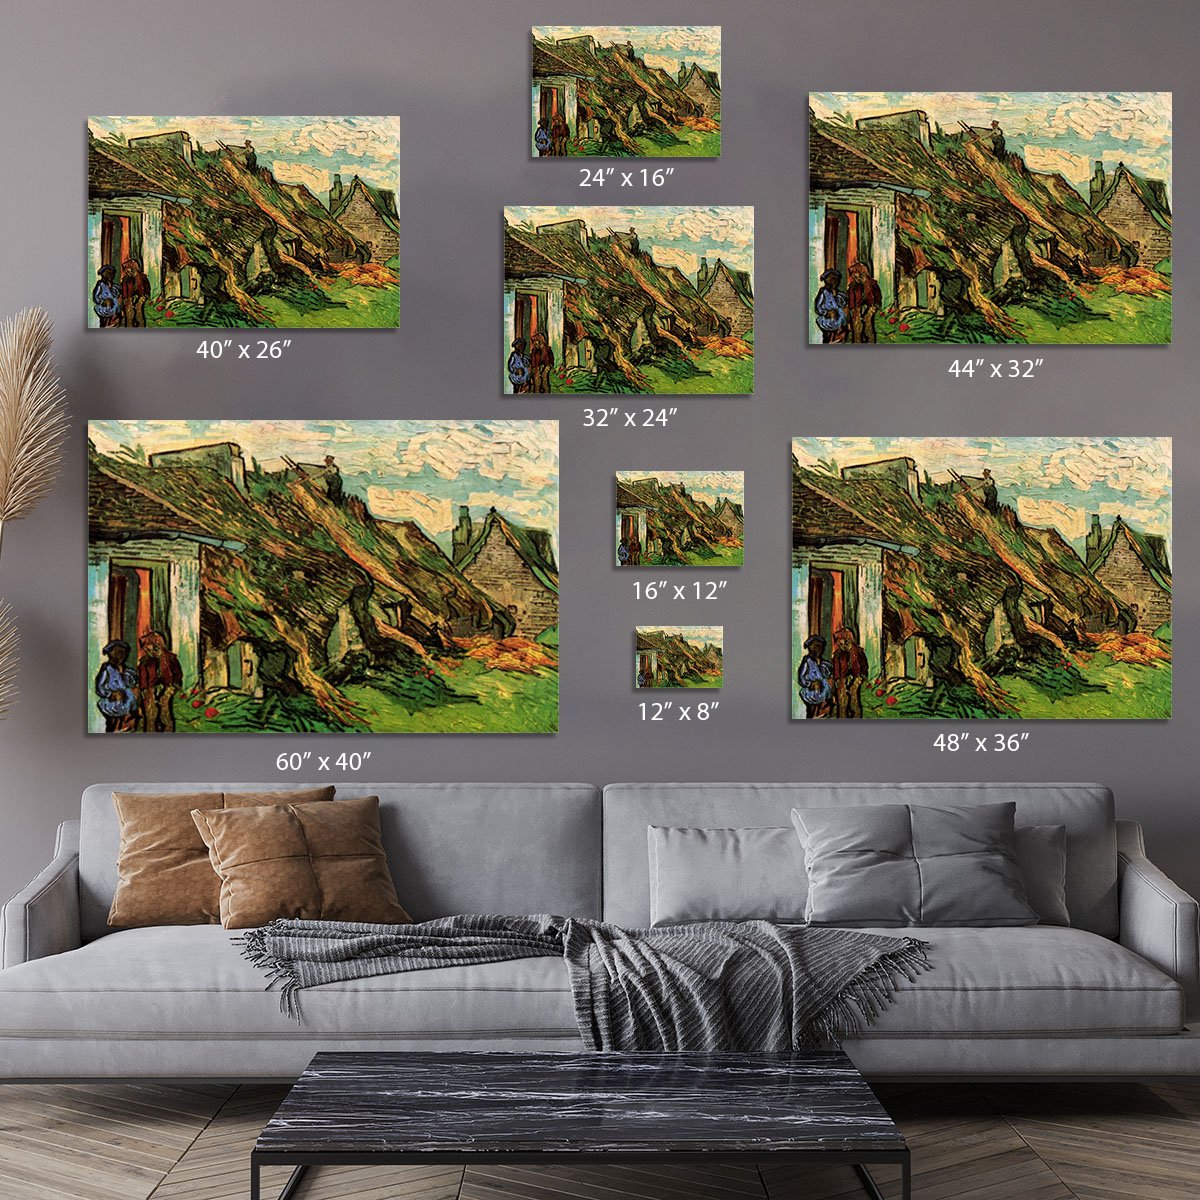 Thatched Sandstone Cottages in Chaponval by Van Gogh Canvas Print or Poster